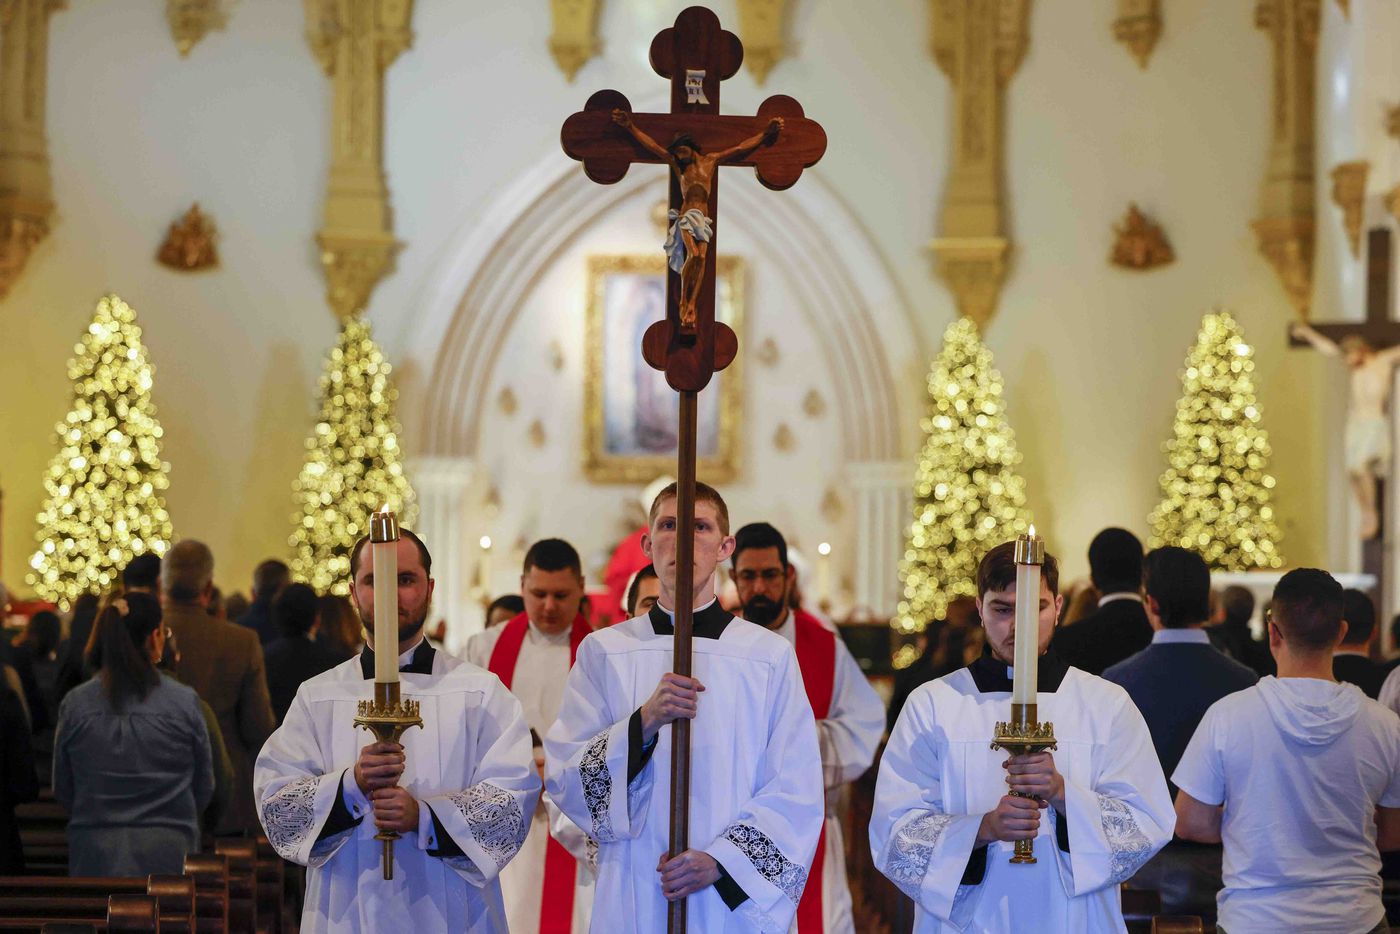 Seminarians process out of the church following a memorial mass for late Pope Emeritus...